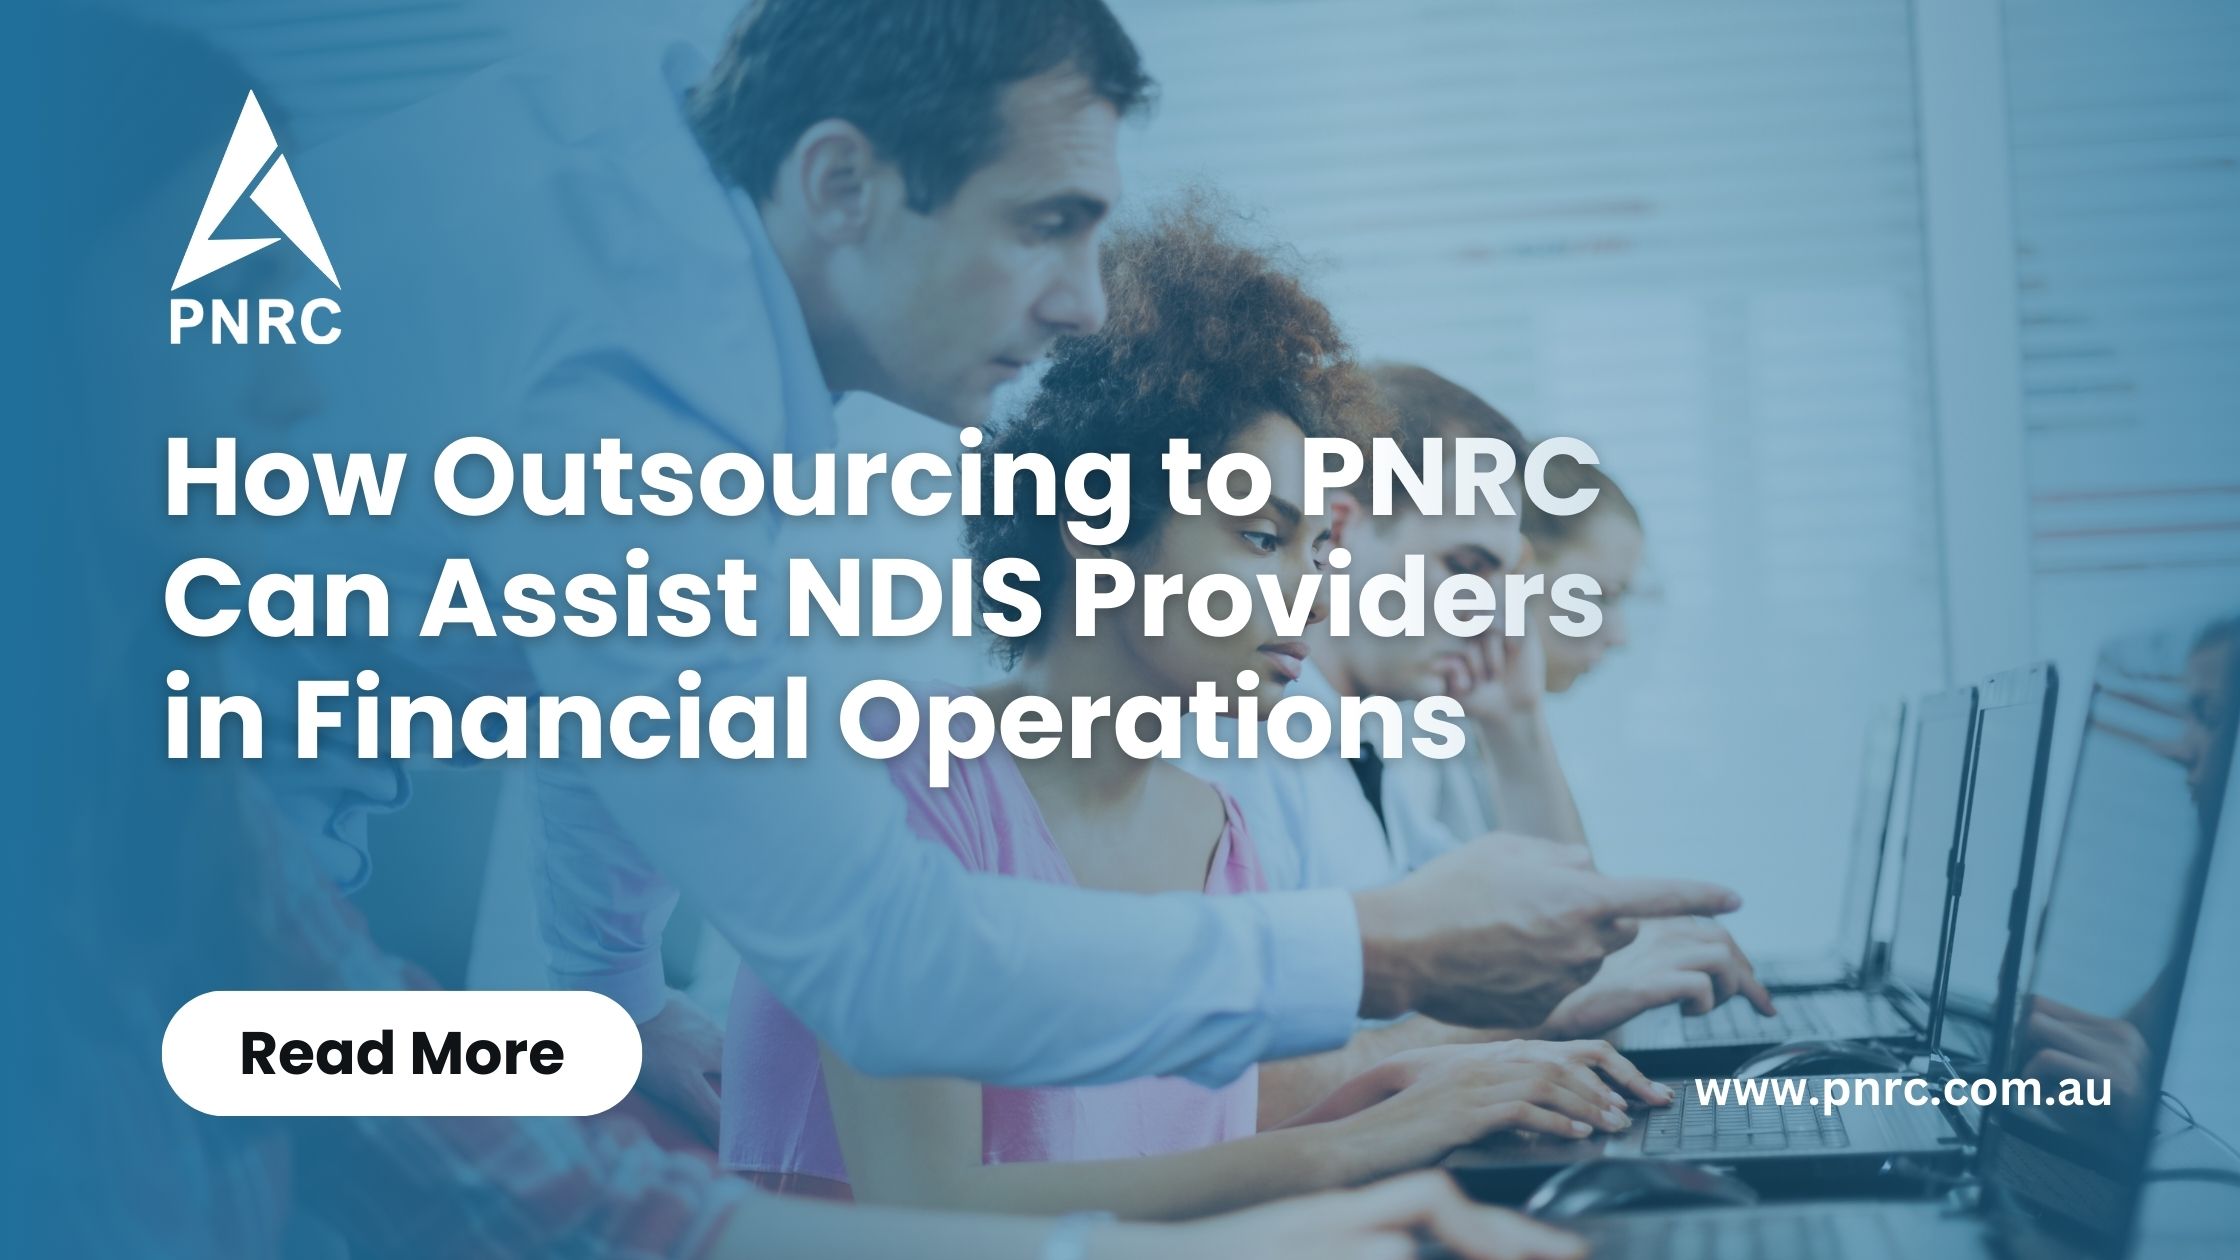 How Outsourcing to PNRC Can Assist NDIS Providers in Financial Operations